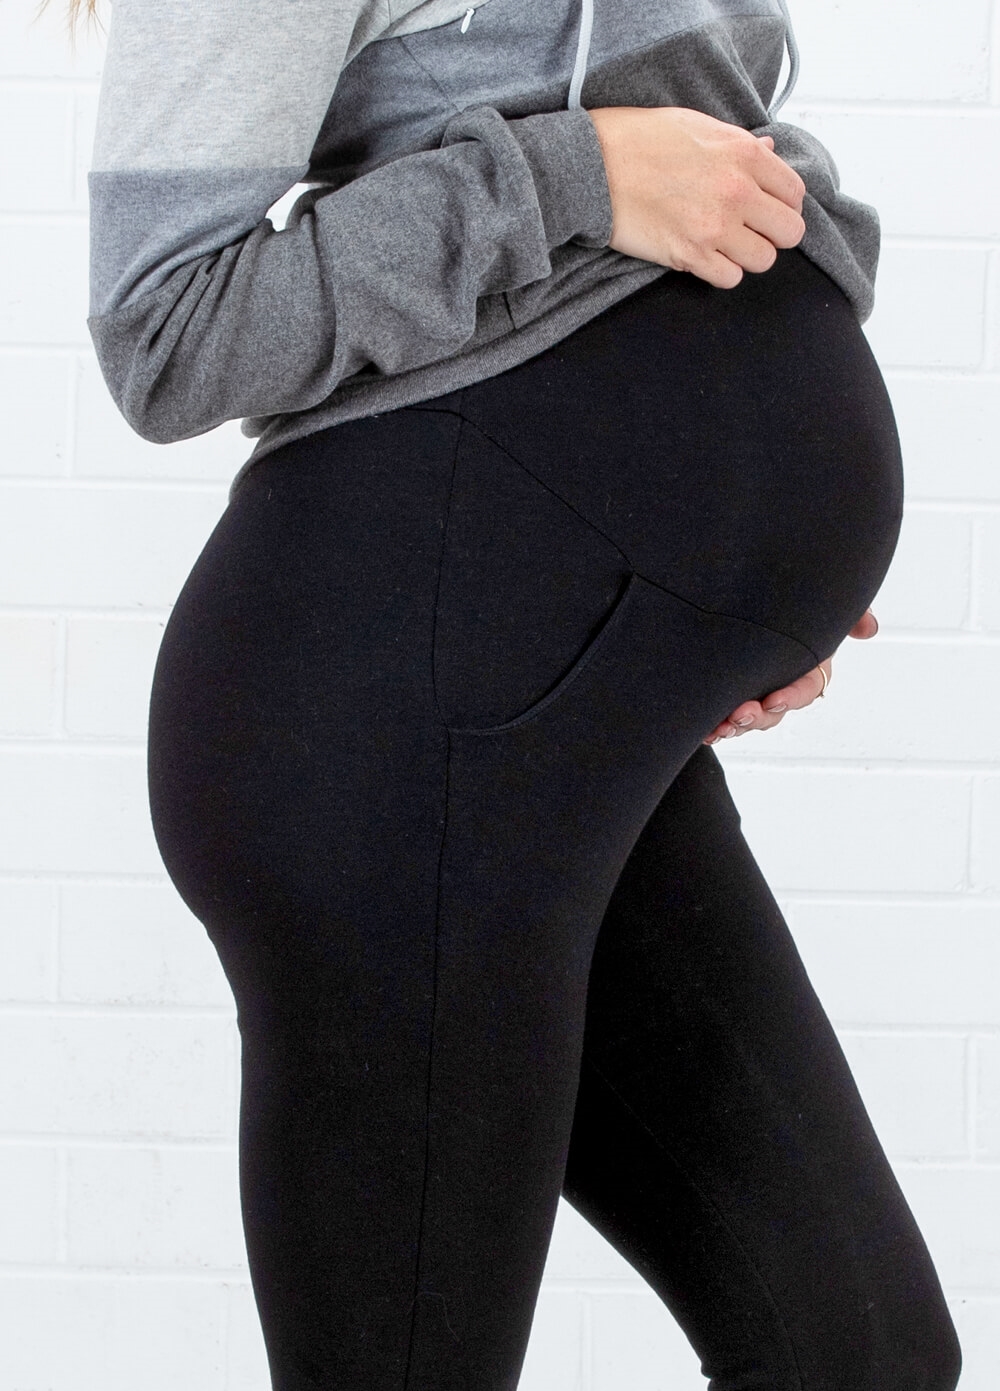 Lait & Co - Ninette Maternity Jogger Pants in Black | Queen Bee